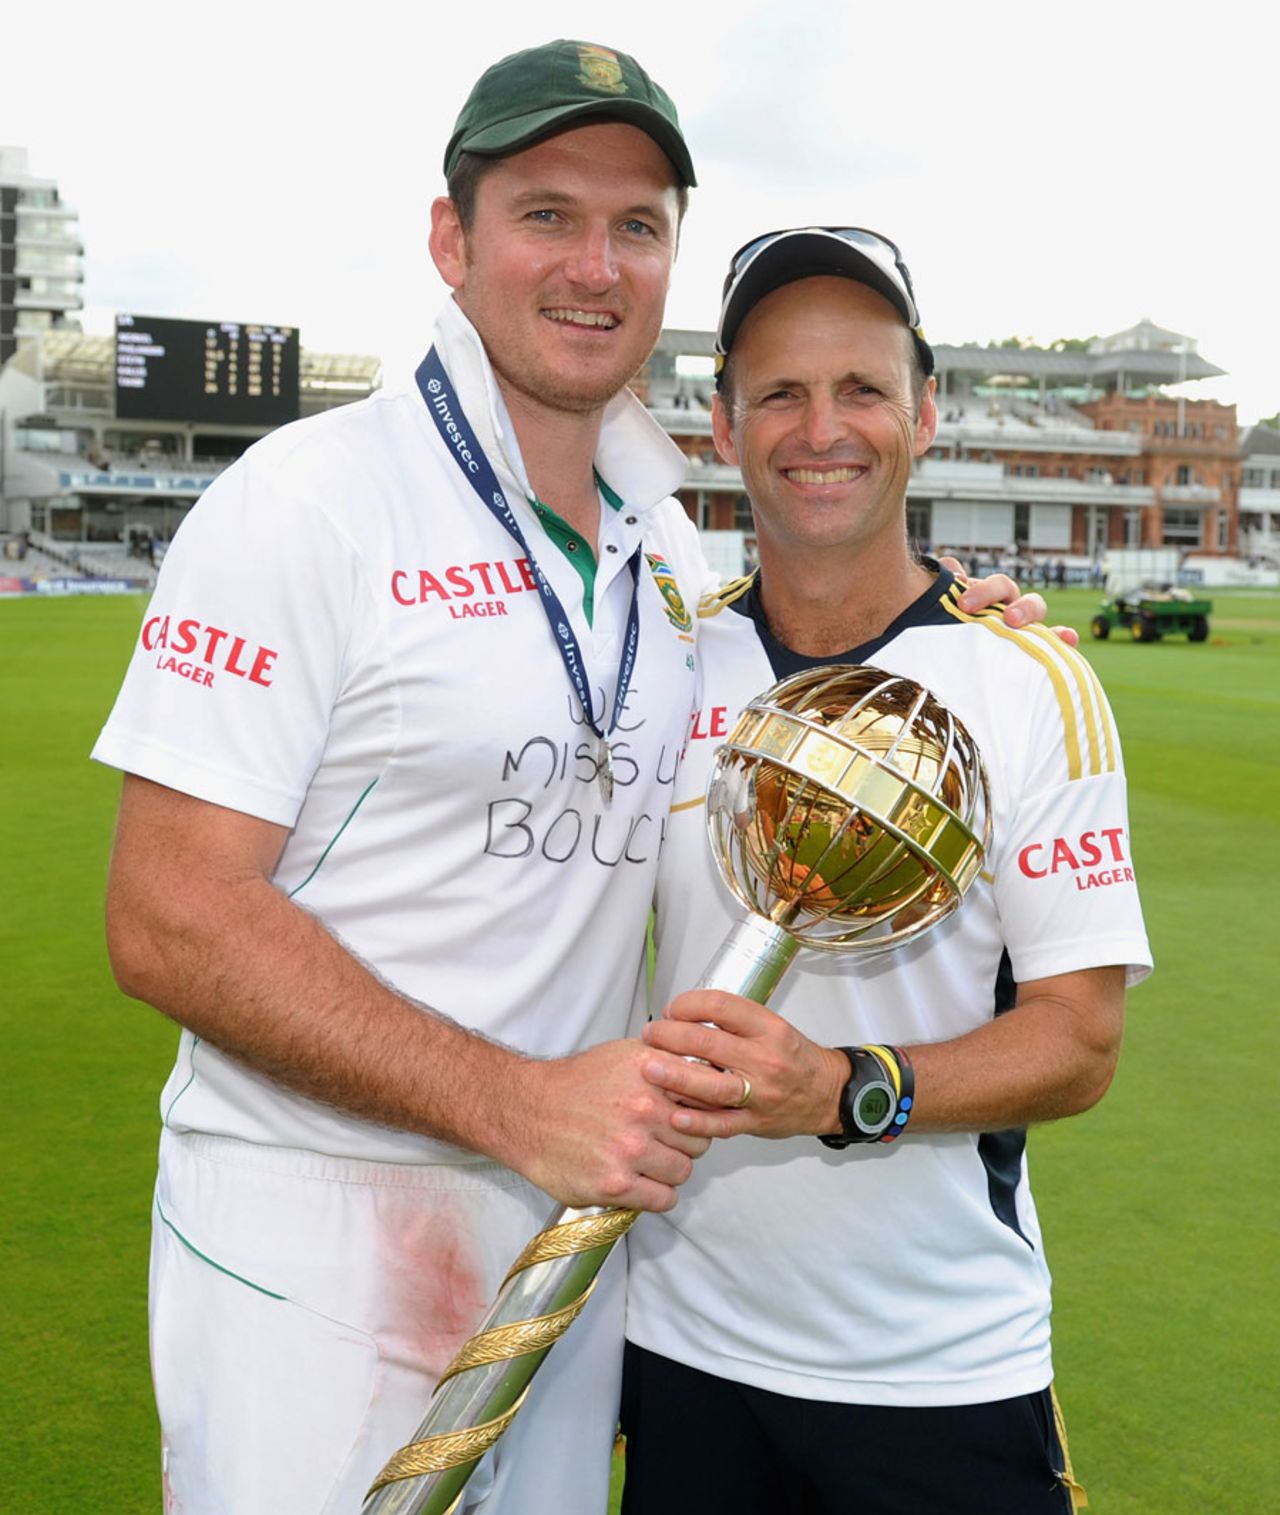 Graeme Smith and Gary Kirsten pose with the ICC mace, England v South Africa, 3rd Investec Test, Lord's, 5th day, August 20, 2012